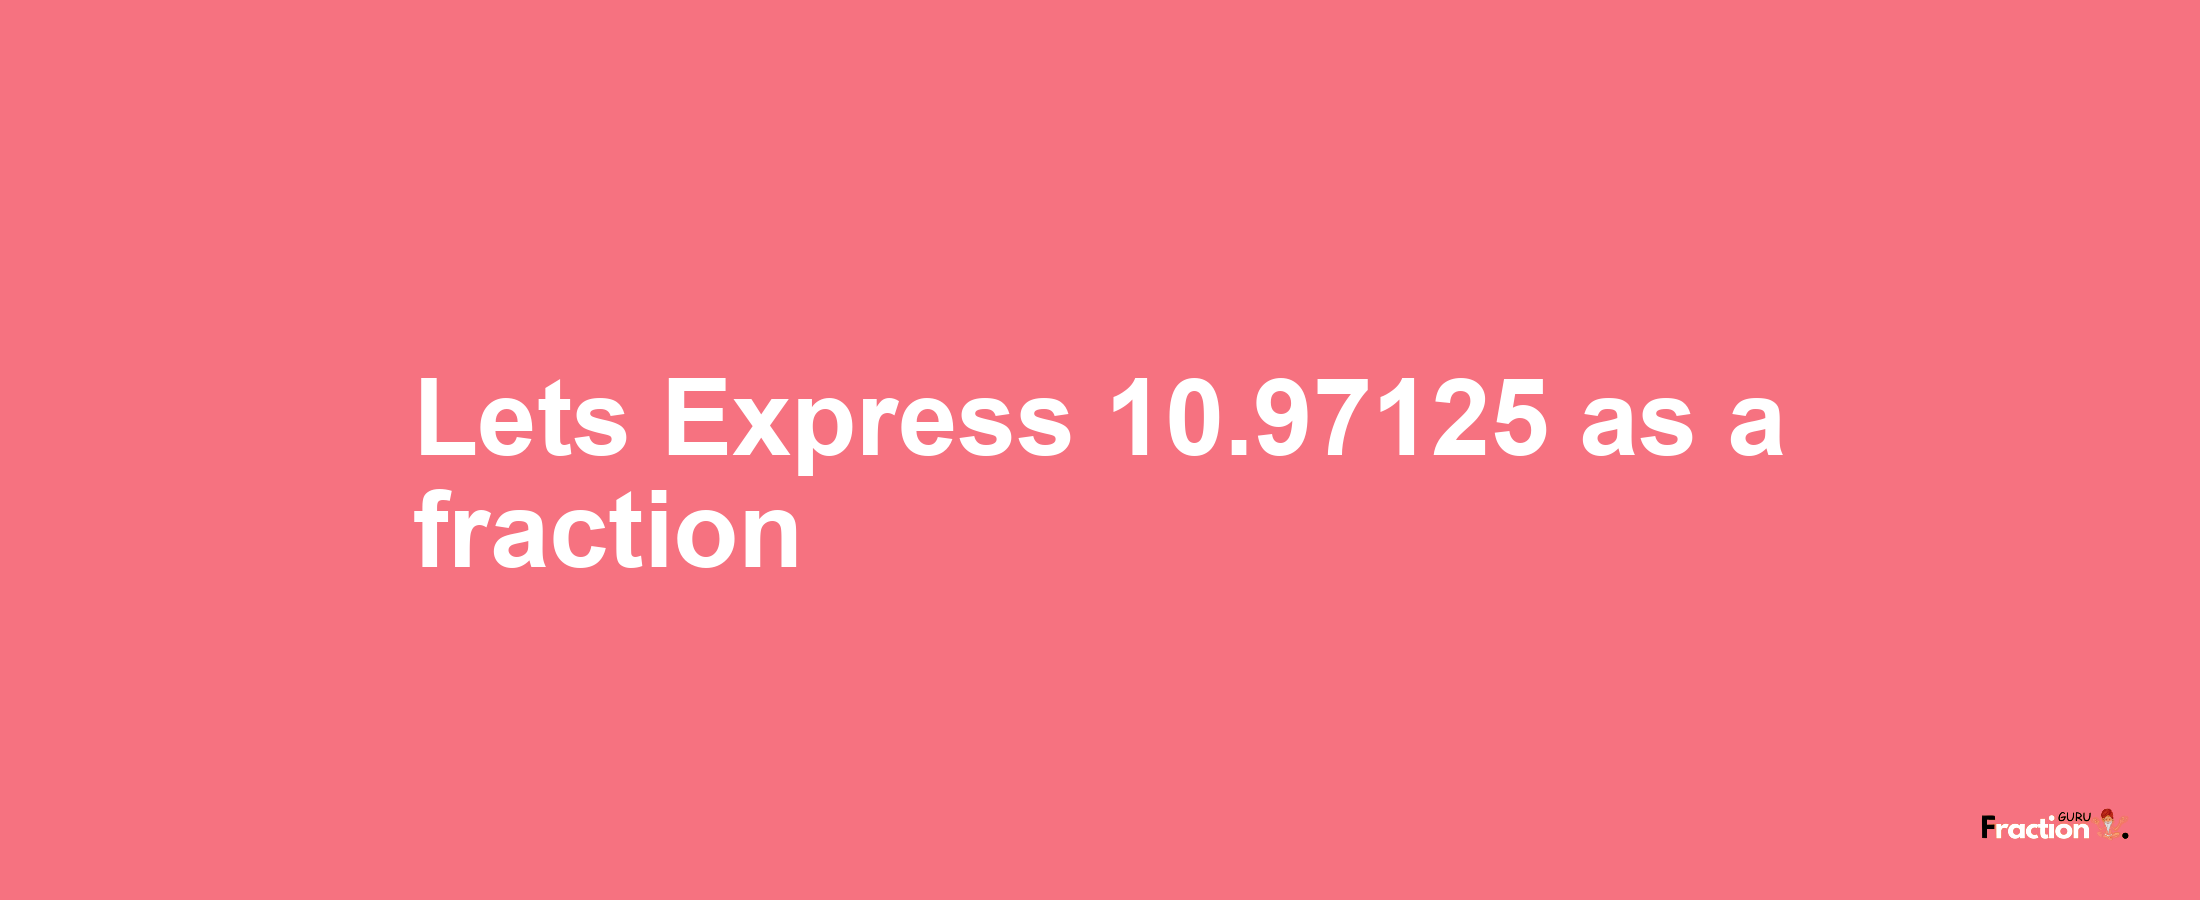 Lets Express 10.97125 as afraction